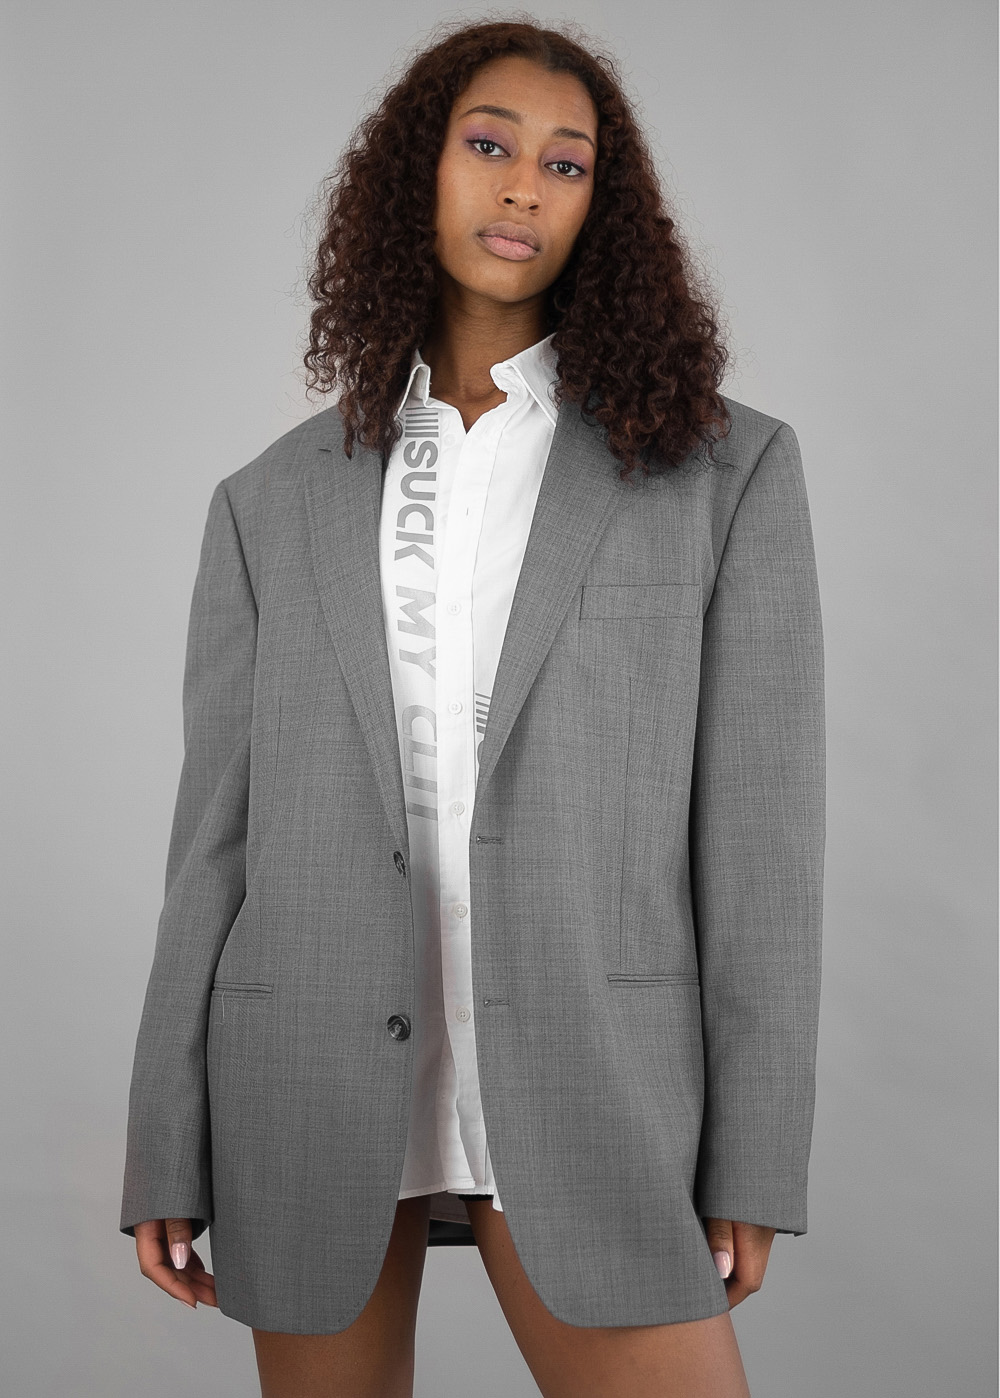 Office Hours Jacket 30